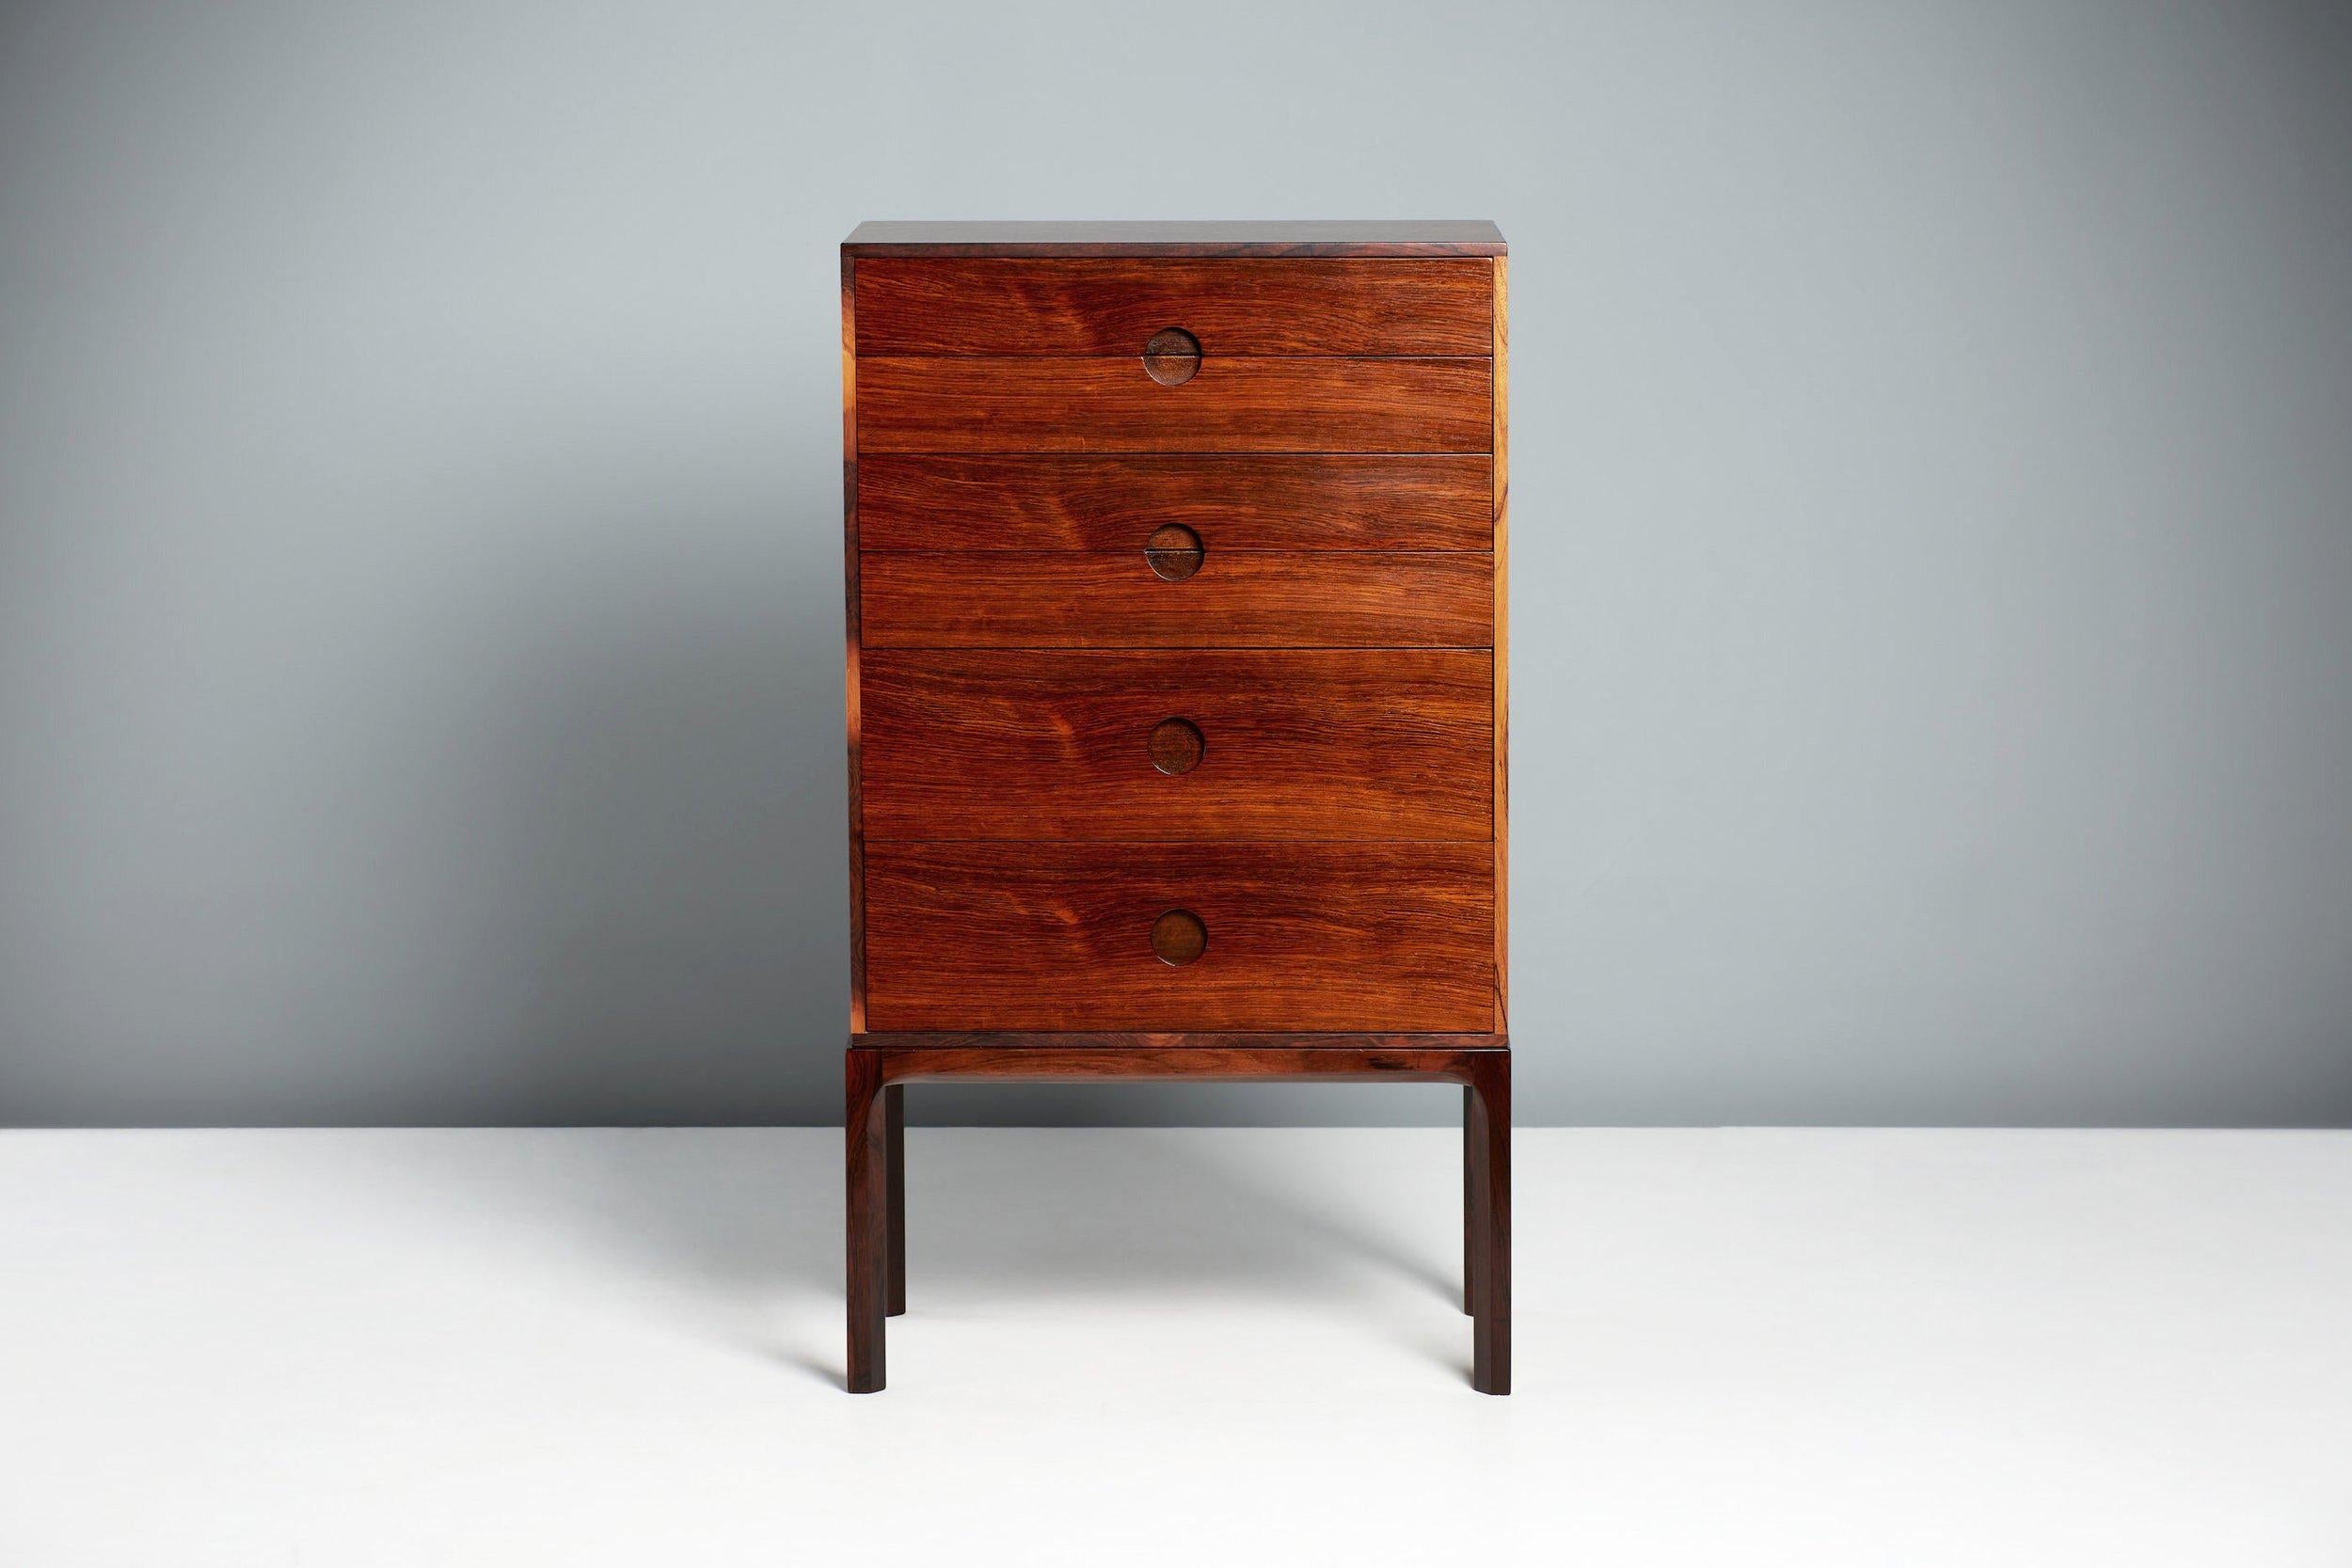 Kai Kristiansen - Pair of Model 385 Chest of Drawers, circa 1960

Rosewood tallboy chests, produced by Aksel Kjersgaard in Odder, Denmark. Solid rosewood frame with veneered cabinet and half-moon drawer pulls. Refinished in Danish oil. Rarely seen